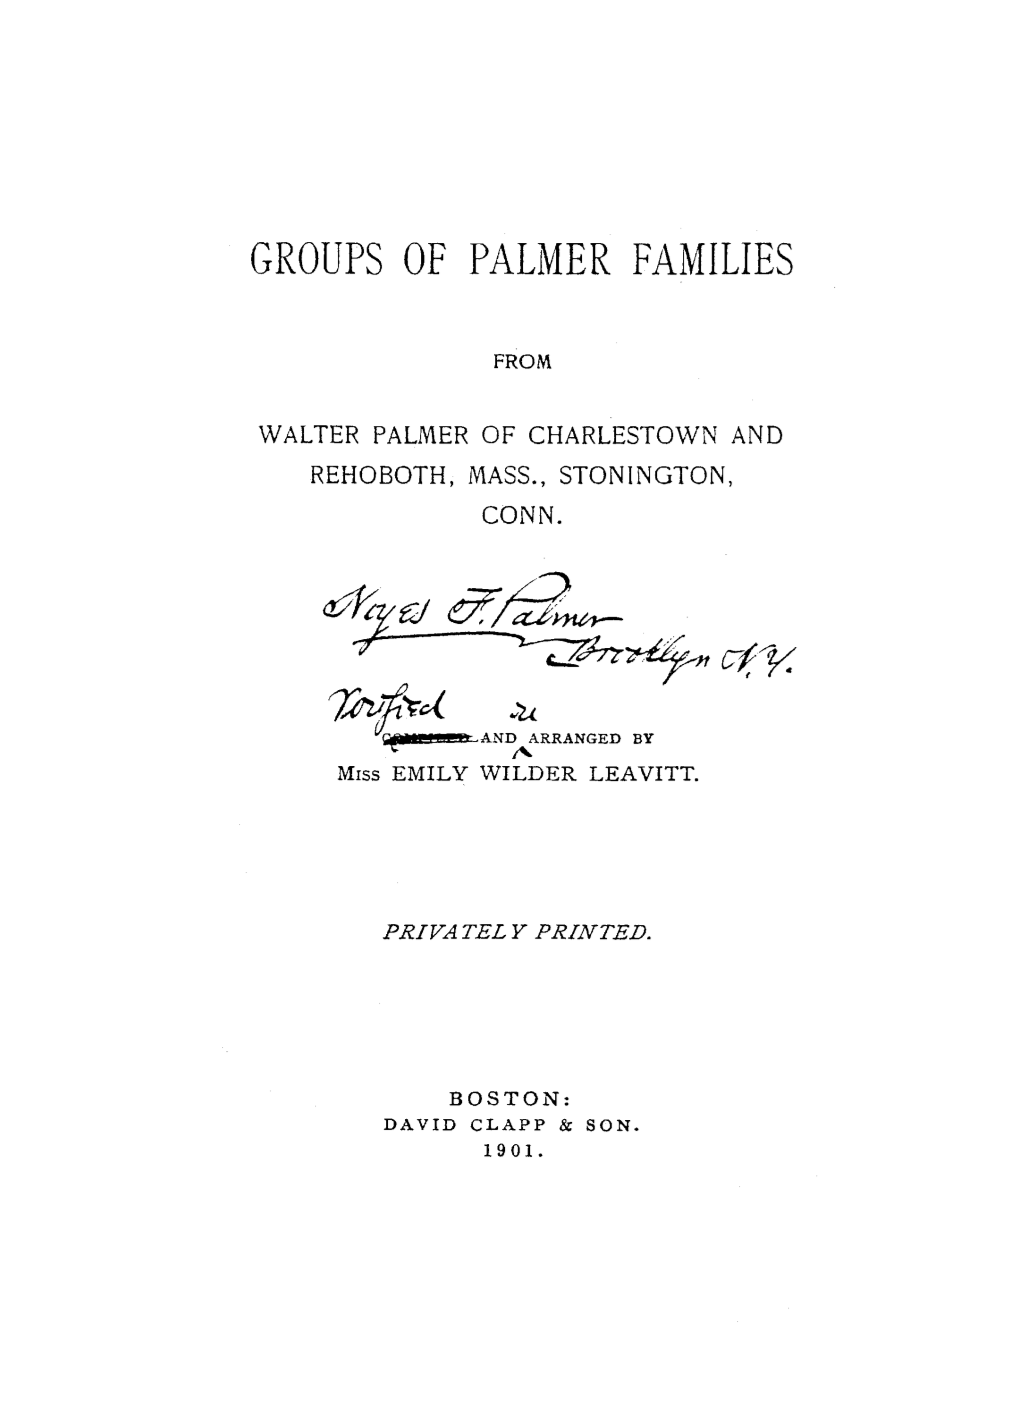 Groups of Palmer Families